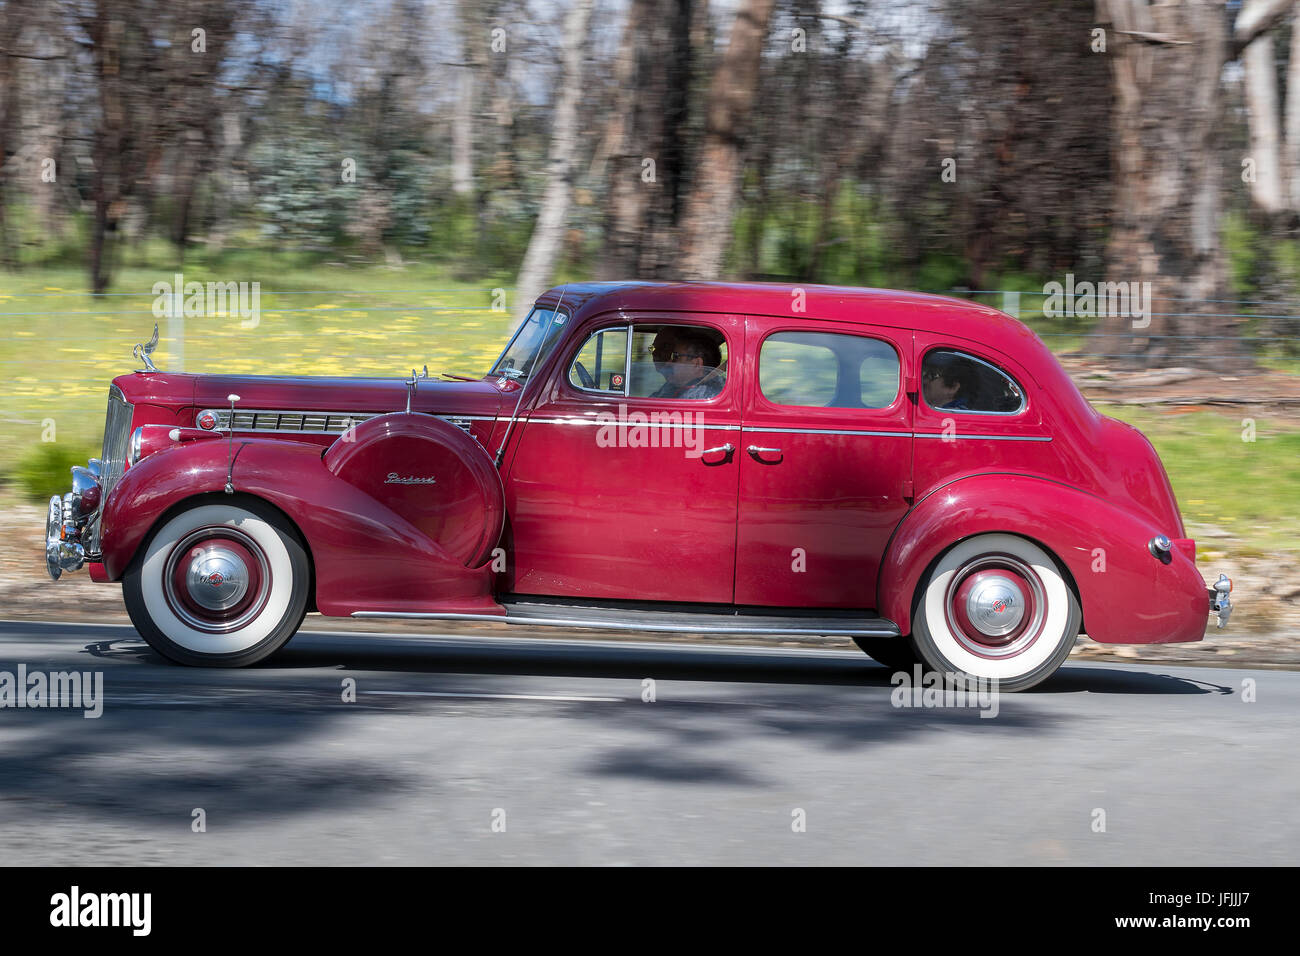 Vintage 1940 Packard 120 Sedan driving on country roads near the town of Birdwood, South Australia. Stock Photo